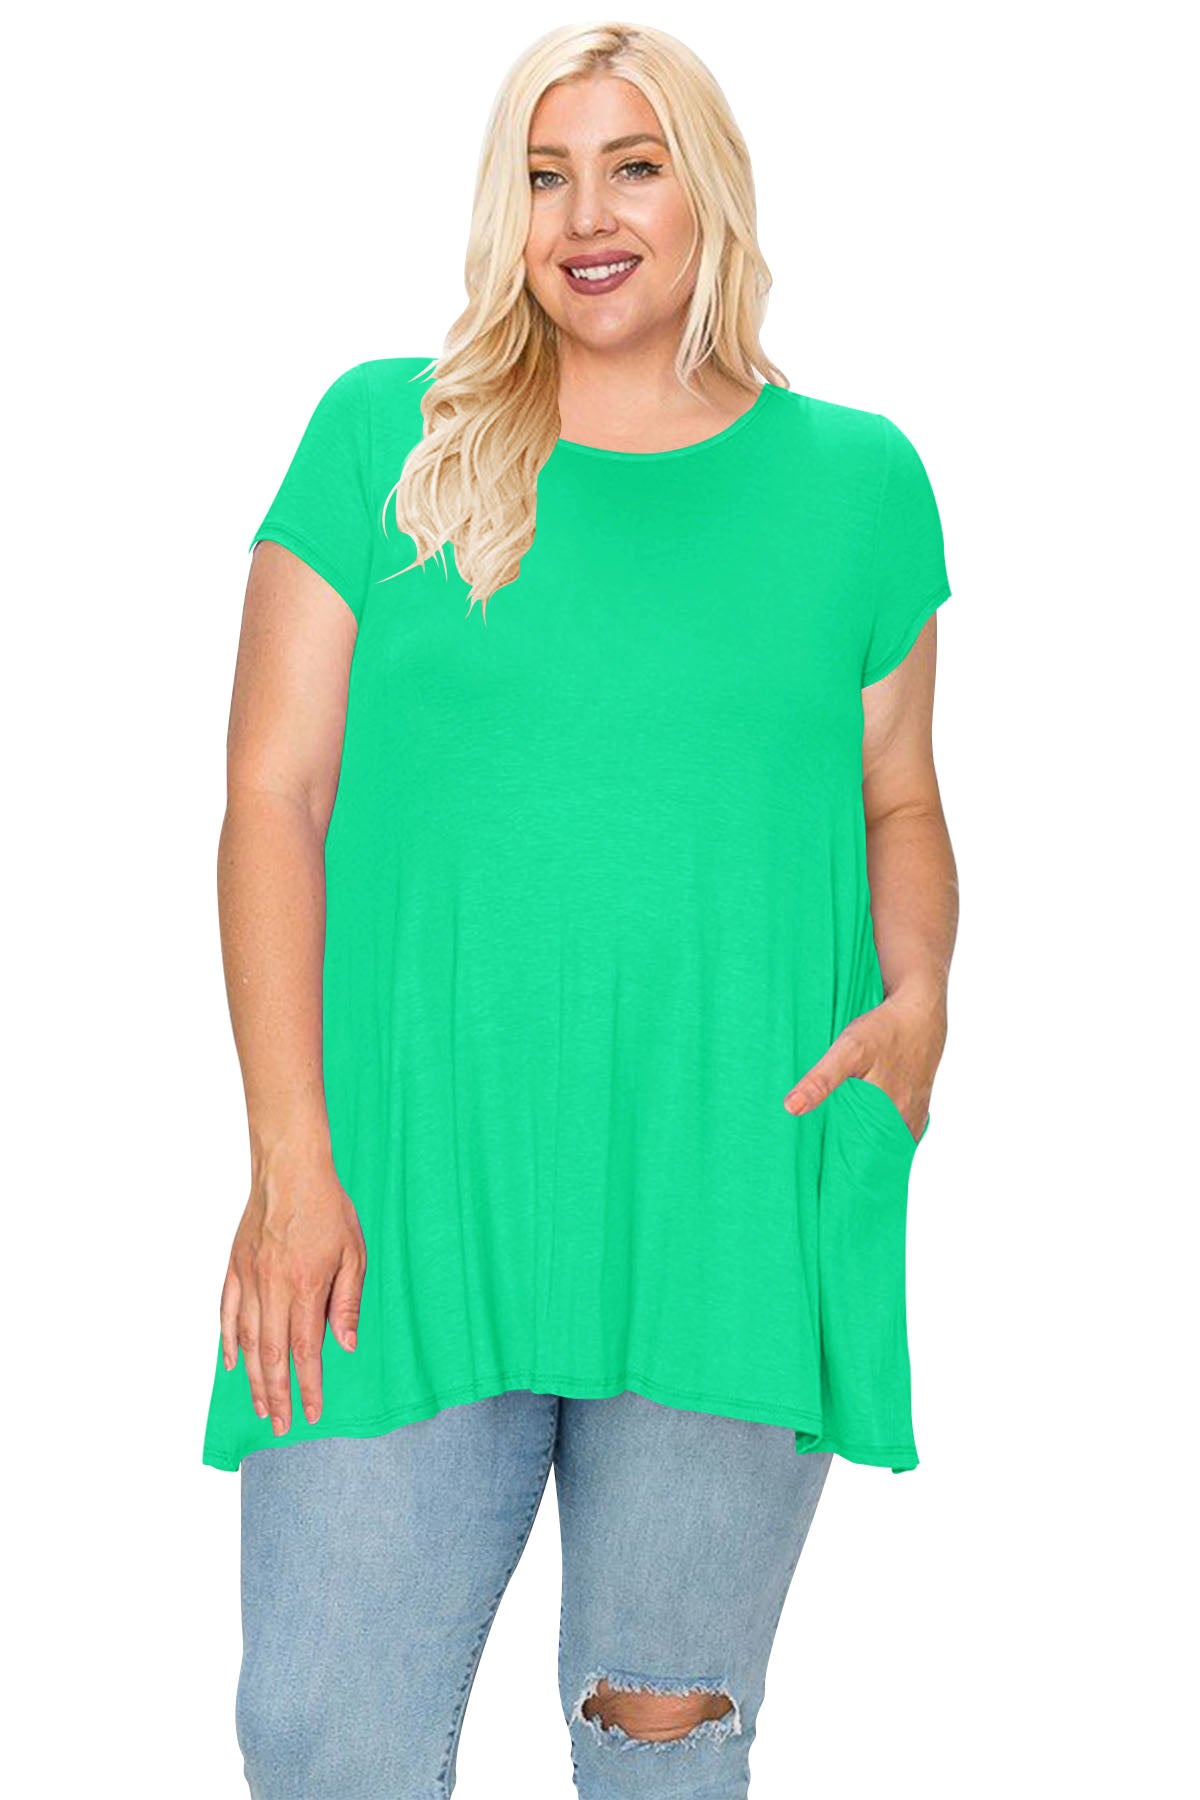 Moa Collection Women's Plus Size Solid Casual Comfort